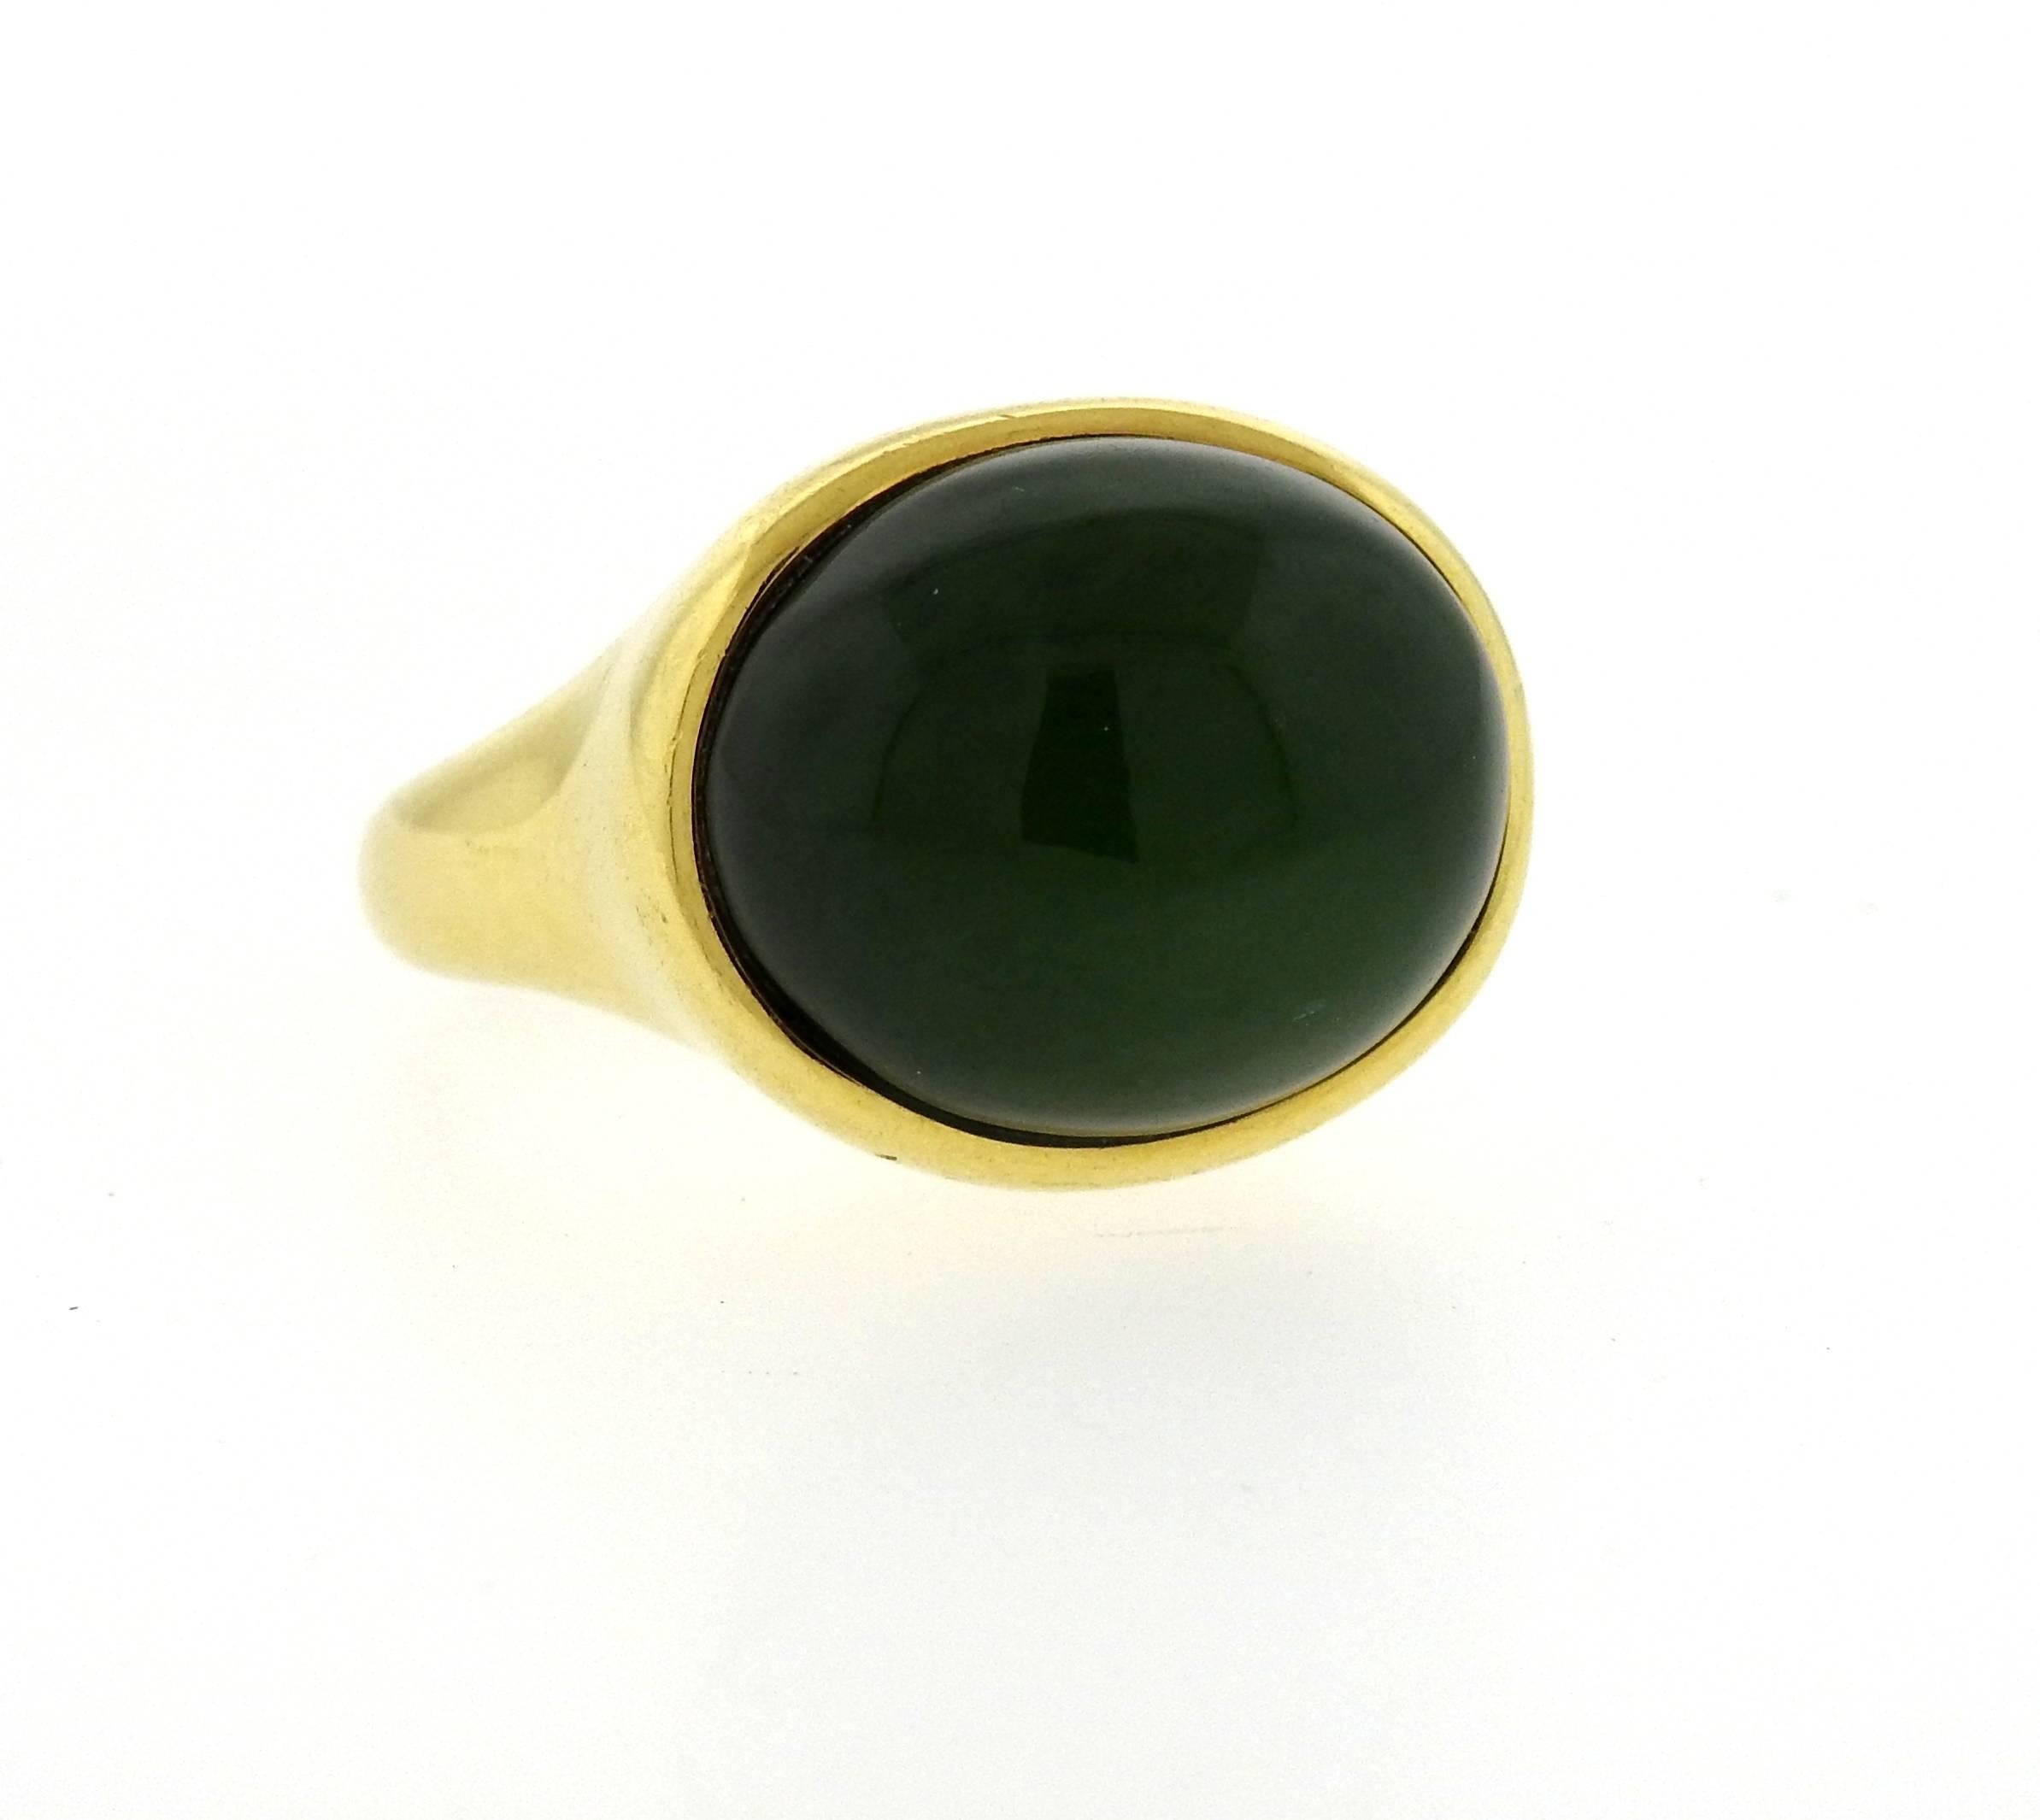 Large 18k yellow gold ring, crafted by Elsa Peretti, featuring 17mm x 19.5mm  jade cabochon. Ring size - 7, ring top is 18mm x 21mm, sits approx. 16mm from the finger . Marked: Tiffany 7 Co, Elsa Peretti, 750, Hong Kong. Weight - 22.9 grams
